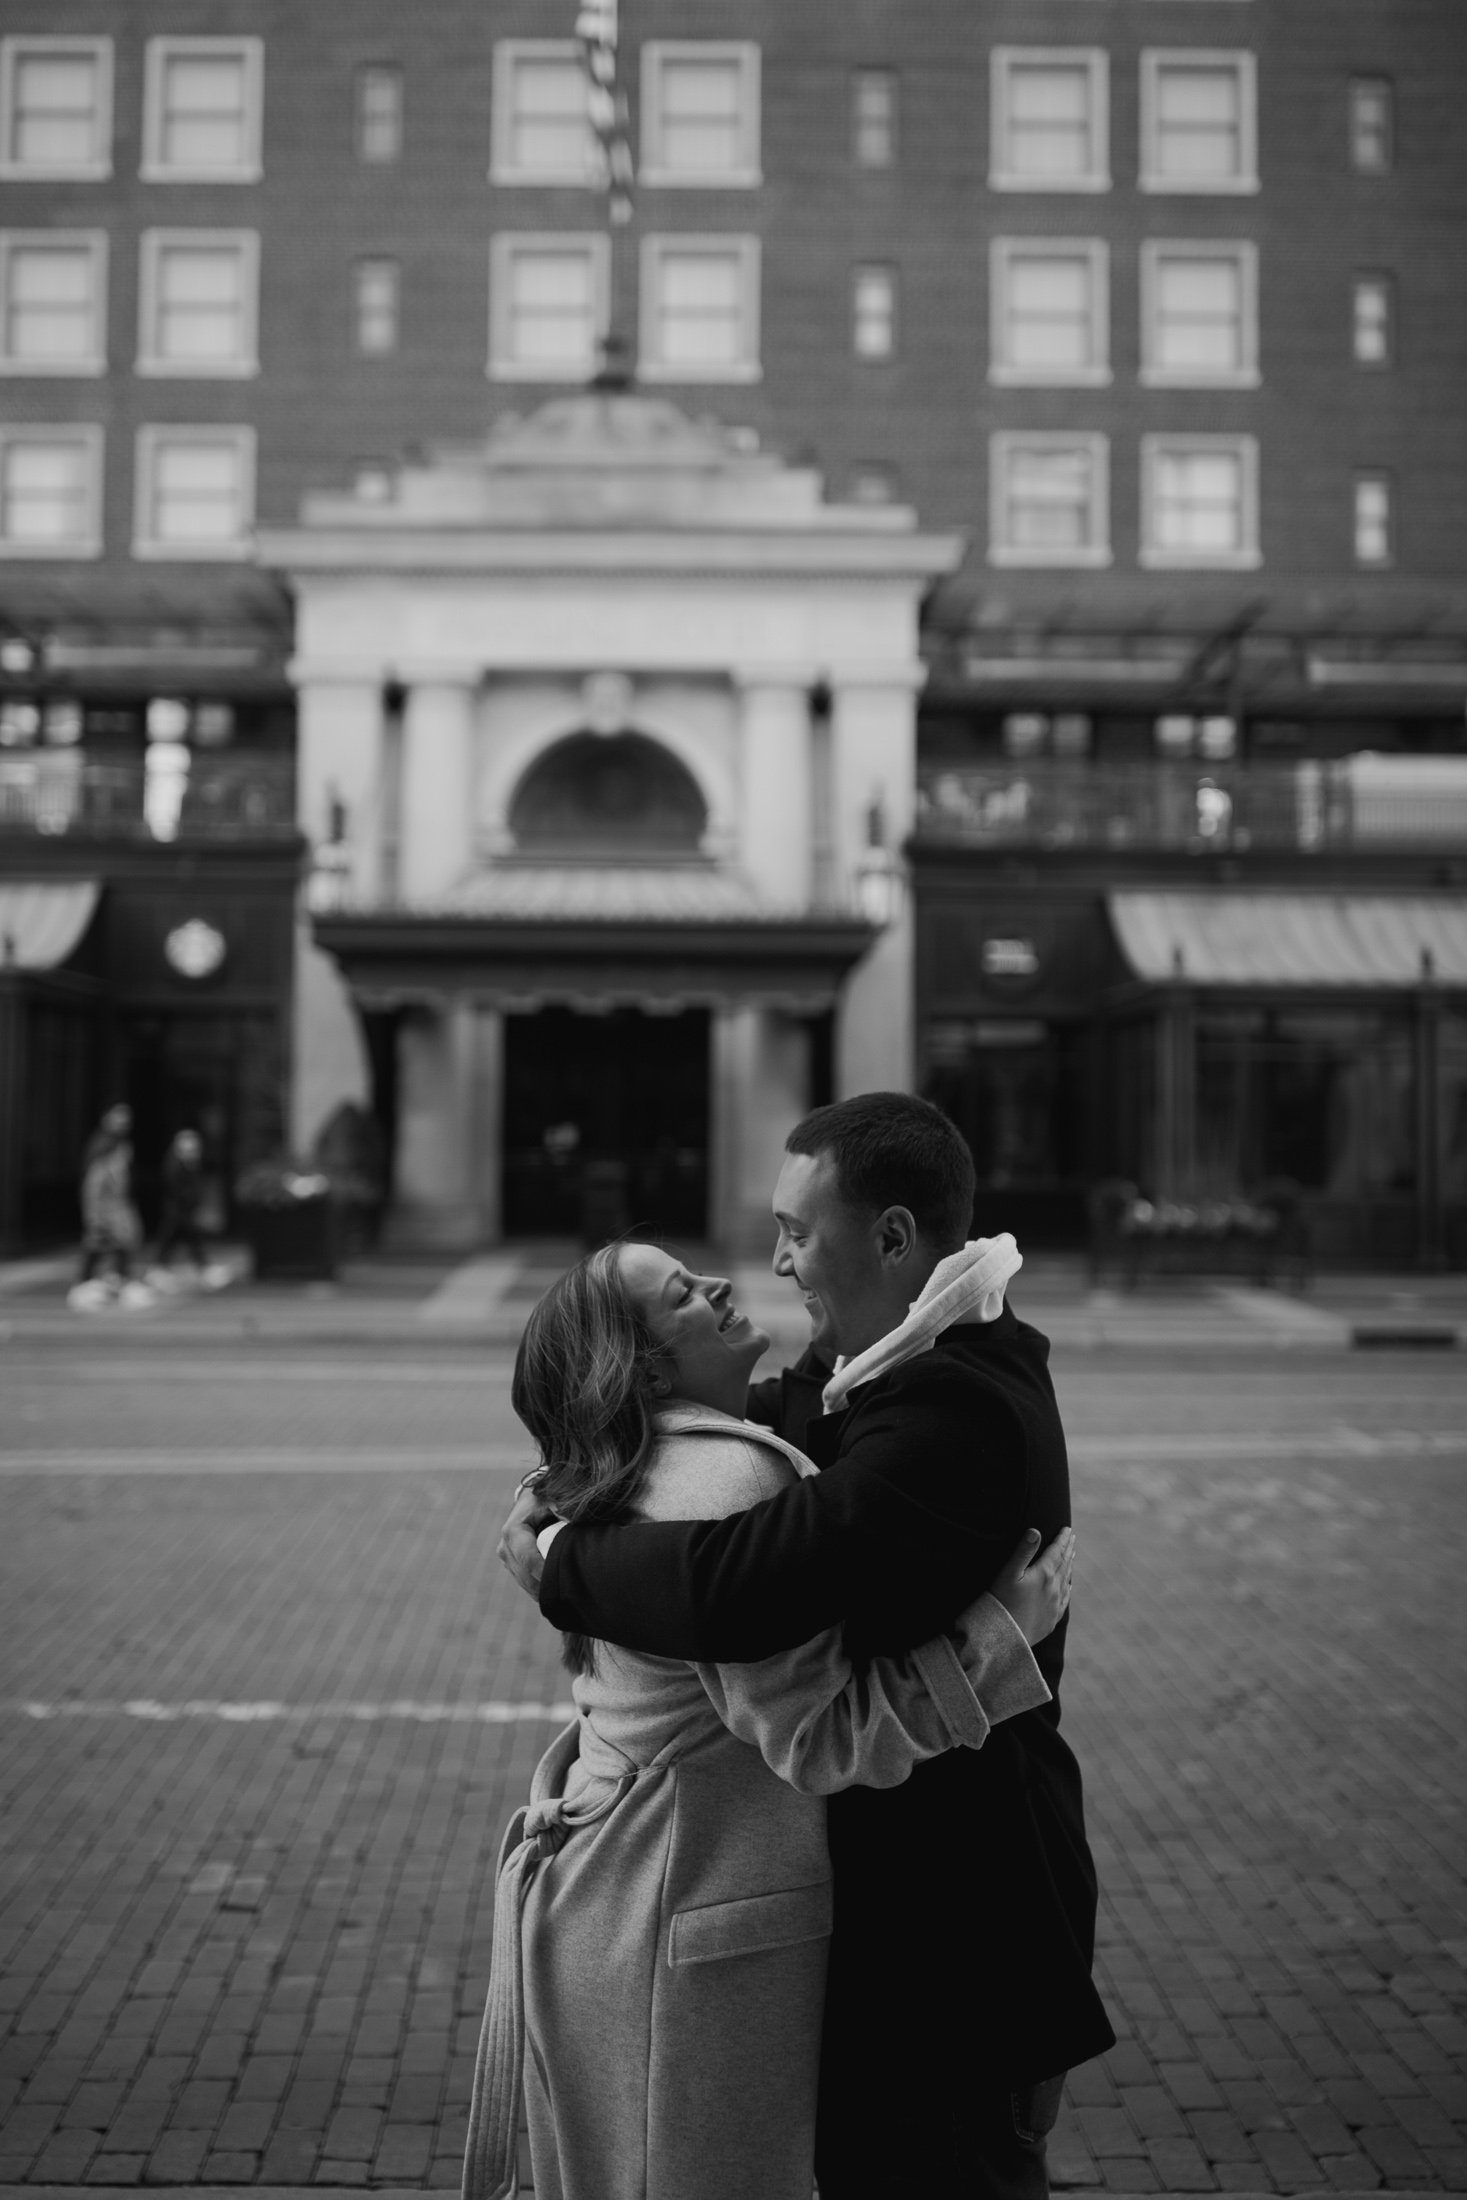 Danielle and Anthony - Grand Rapids Engagement Session - Grand Rapids Wedding Photographer - West Michigan Wedding Photographer Jessica Darling - J Darling Photo_043.jpg